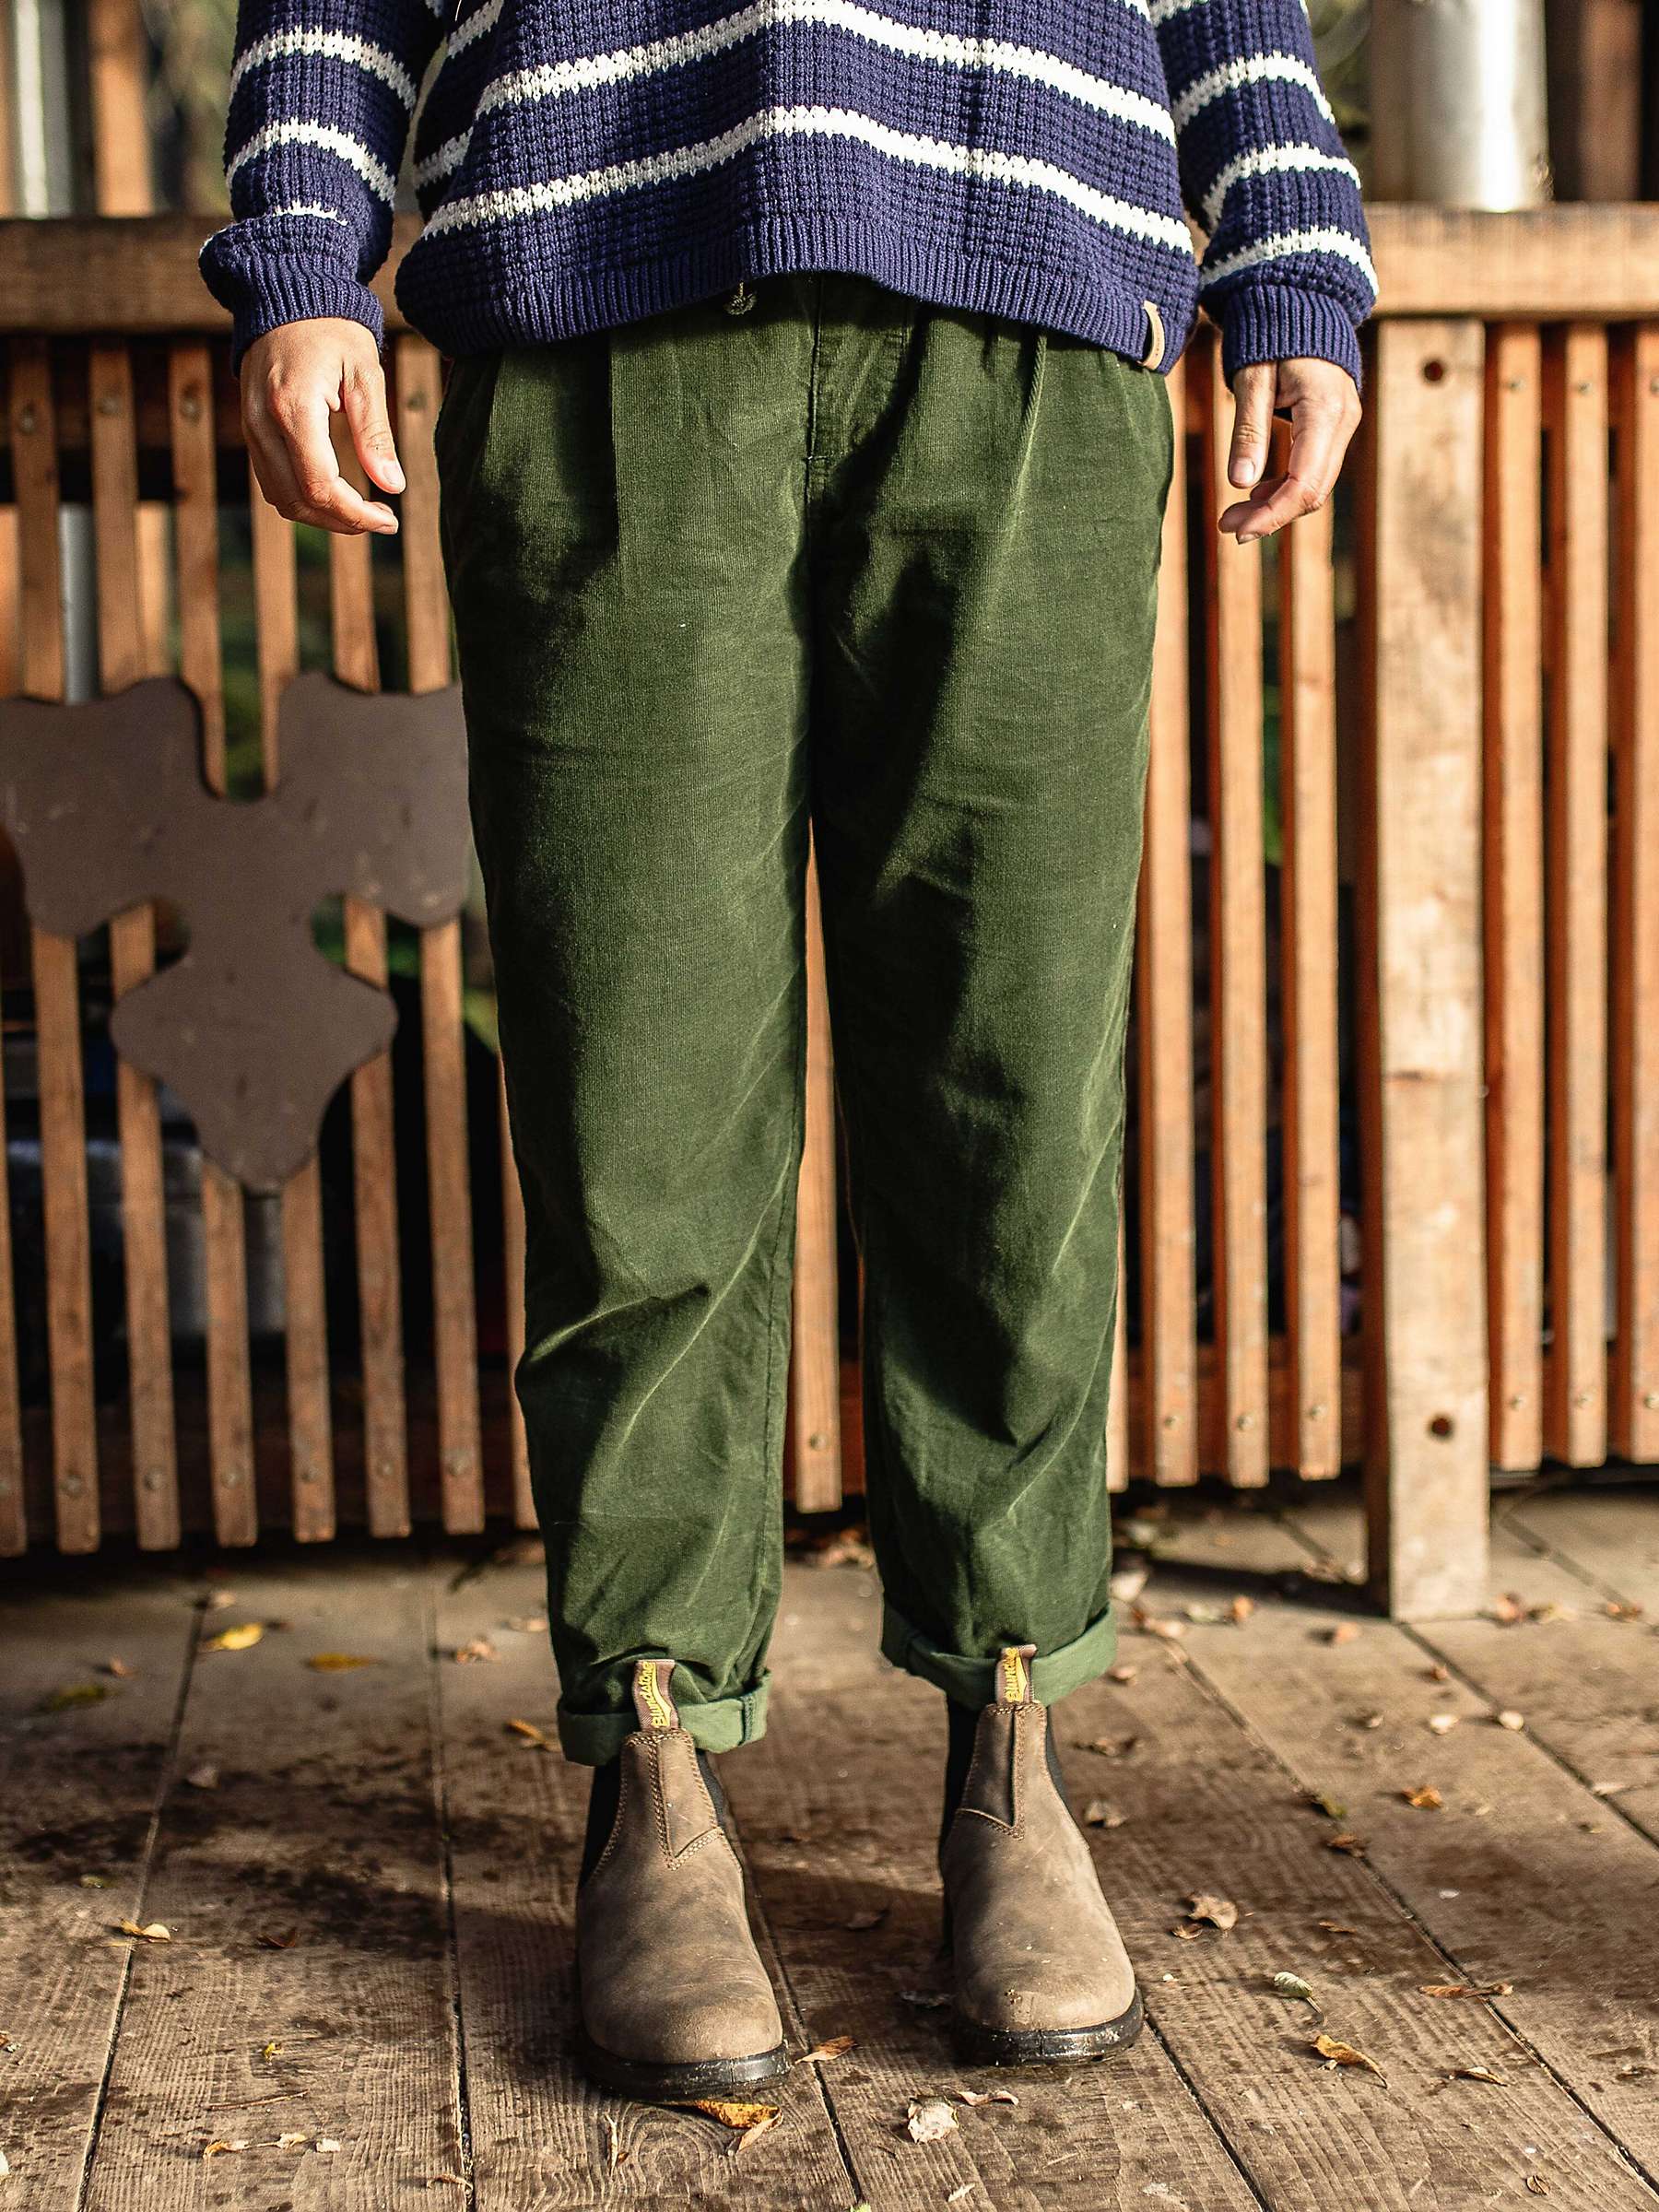 Buy Passenger Compass Corduroy Trousers Online at johnlewis.com